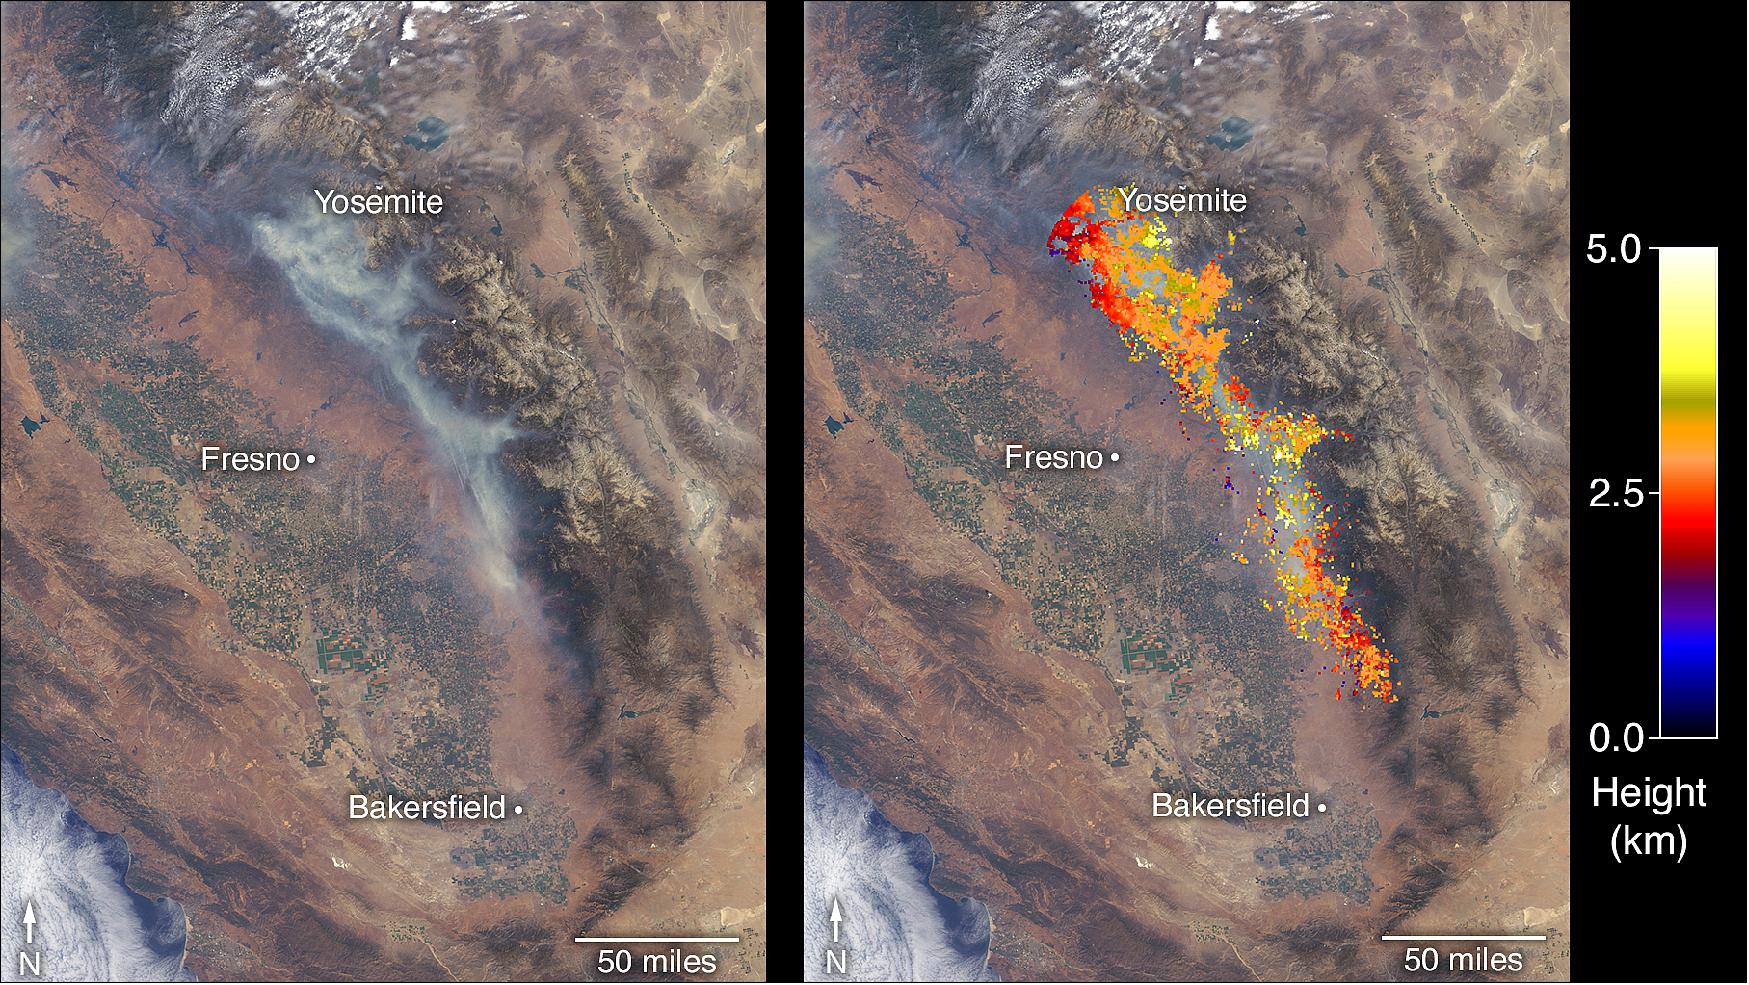 Figure 17: The left image shows the Ferguson Fire near Yosemite National Park on July 29 as observed by NASA's MISR instrument. The angular information from MISR's images is used to calculate the height of the smoke plume. The results are superimposed on the image on the right (image credit: NASA)